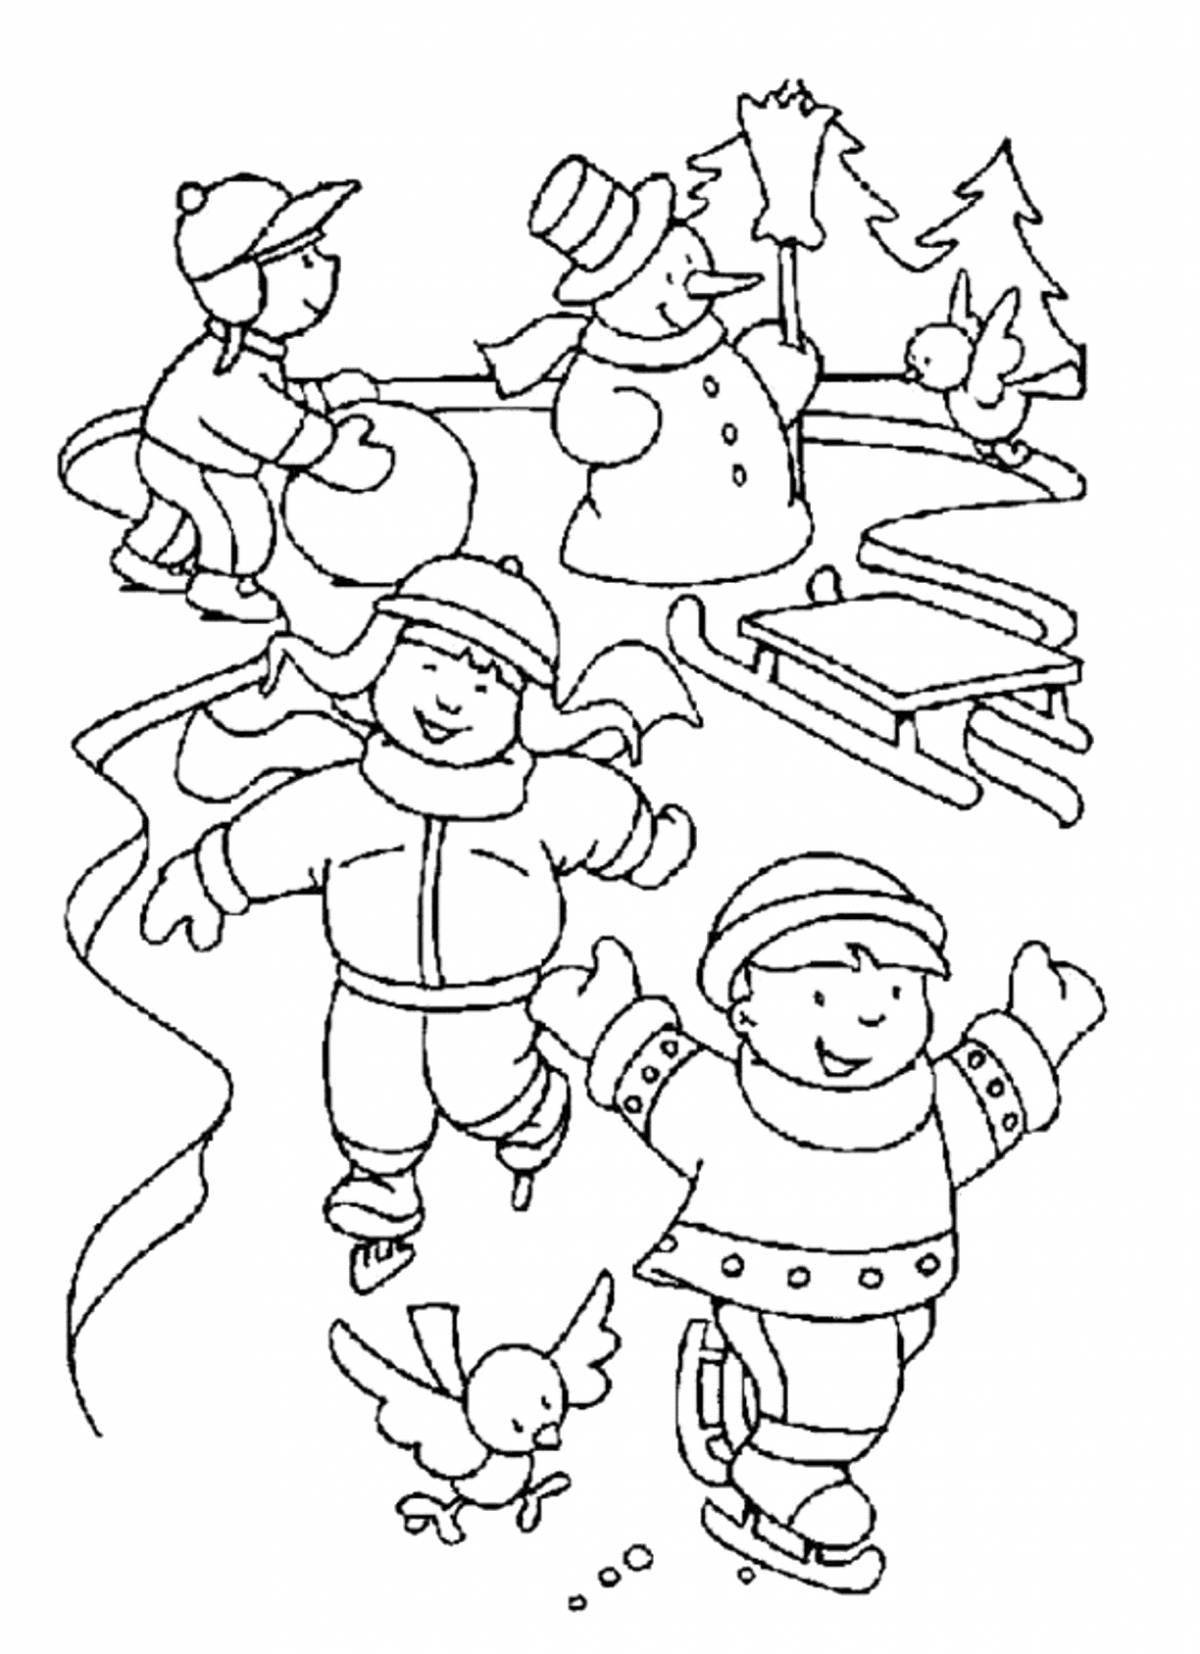 Radiant coloring page children have fun in winter